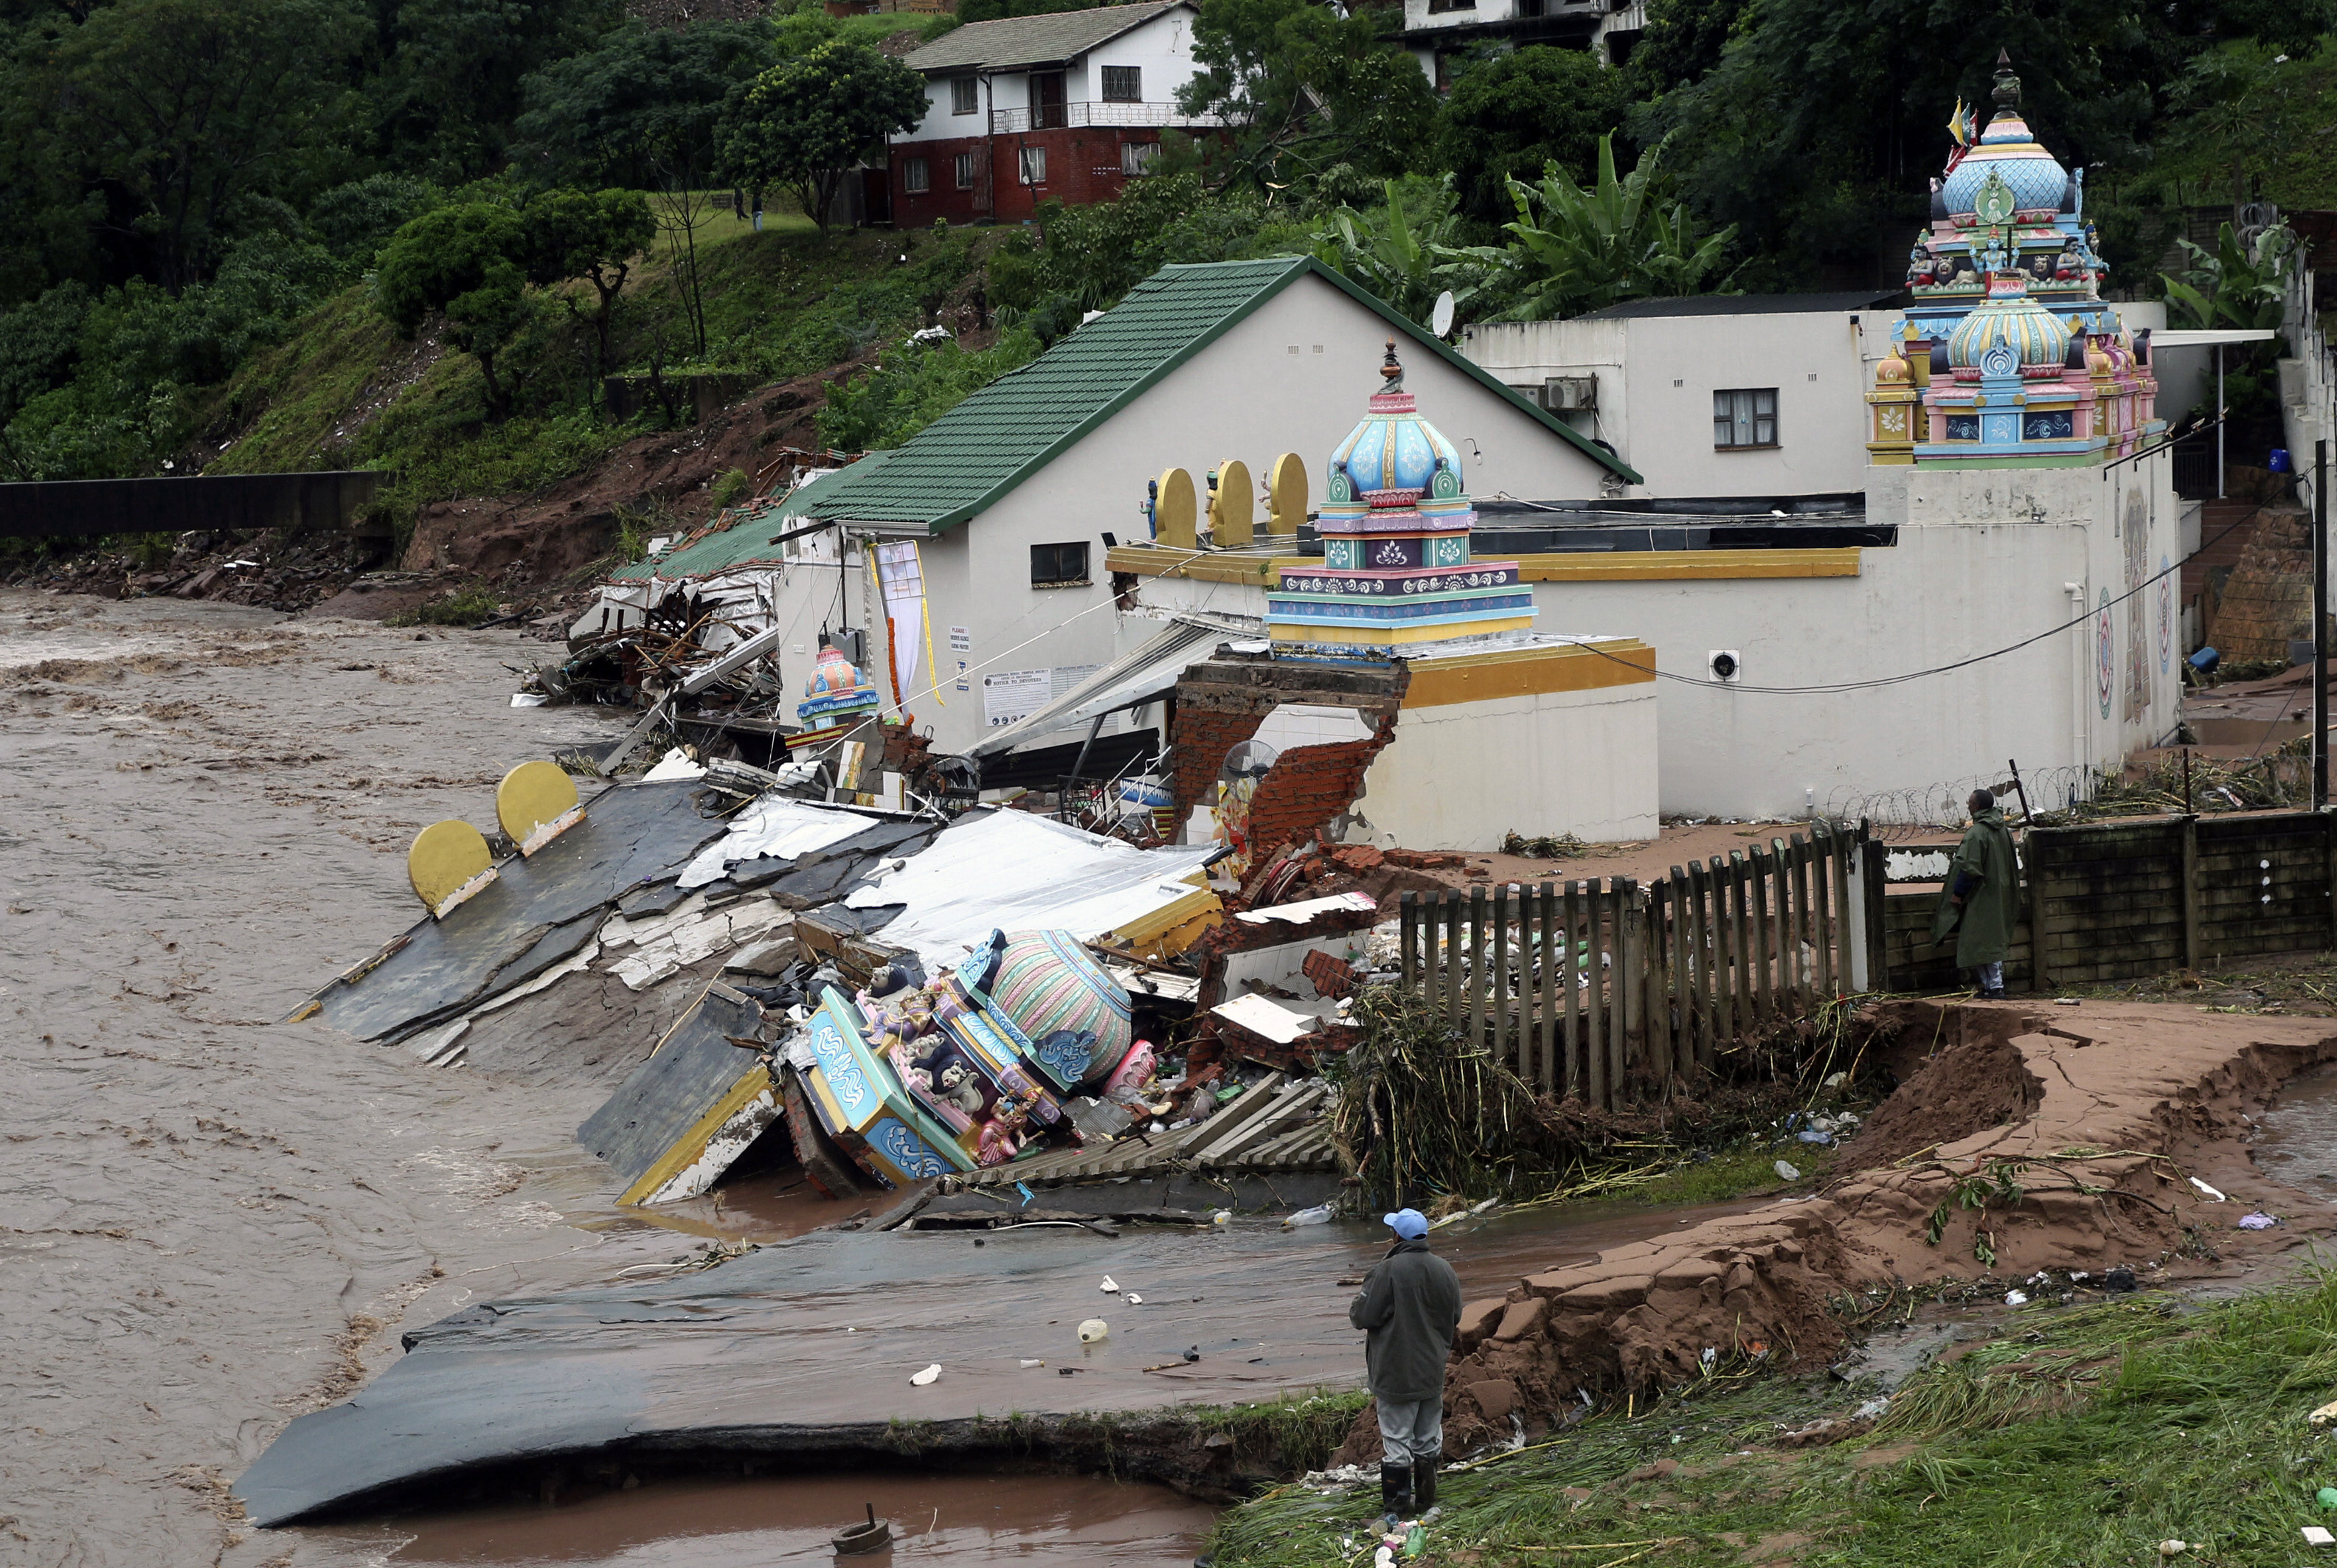 The Vishnu Hindu Temple was severely damaged by flooding on Mhlathuzana river in Chatsworth, outside Durban, South Africa on Tuesday. Photo: AP